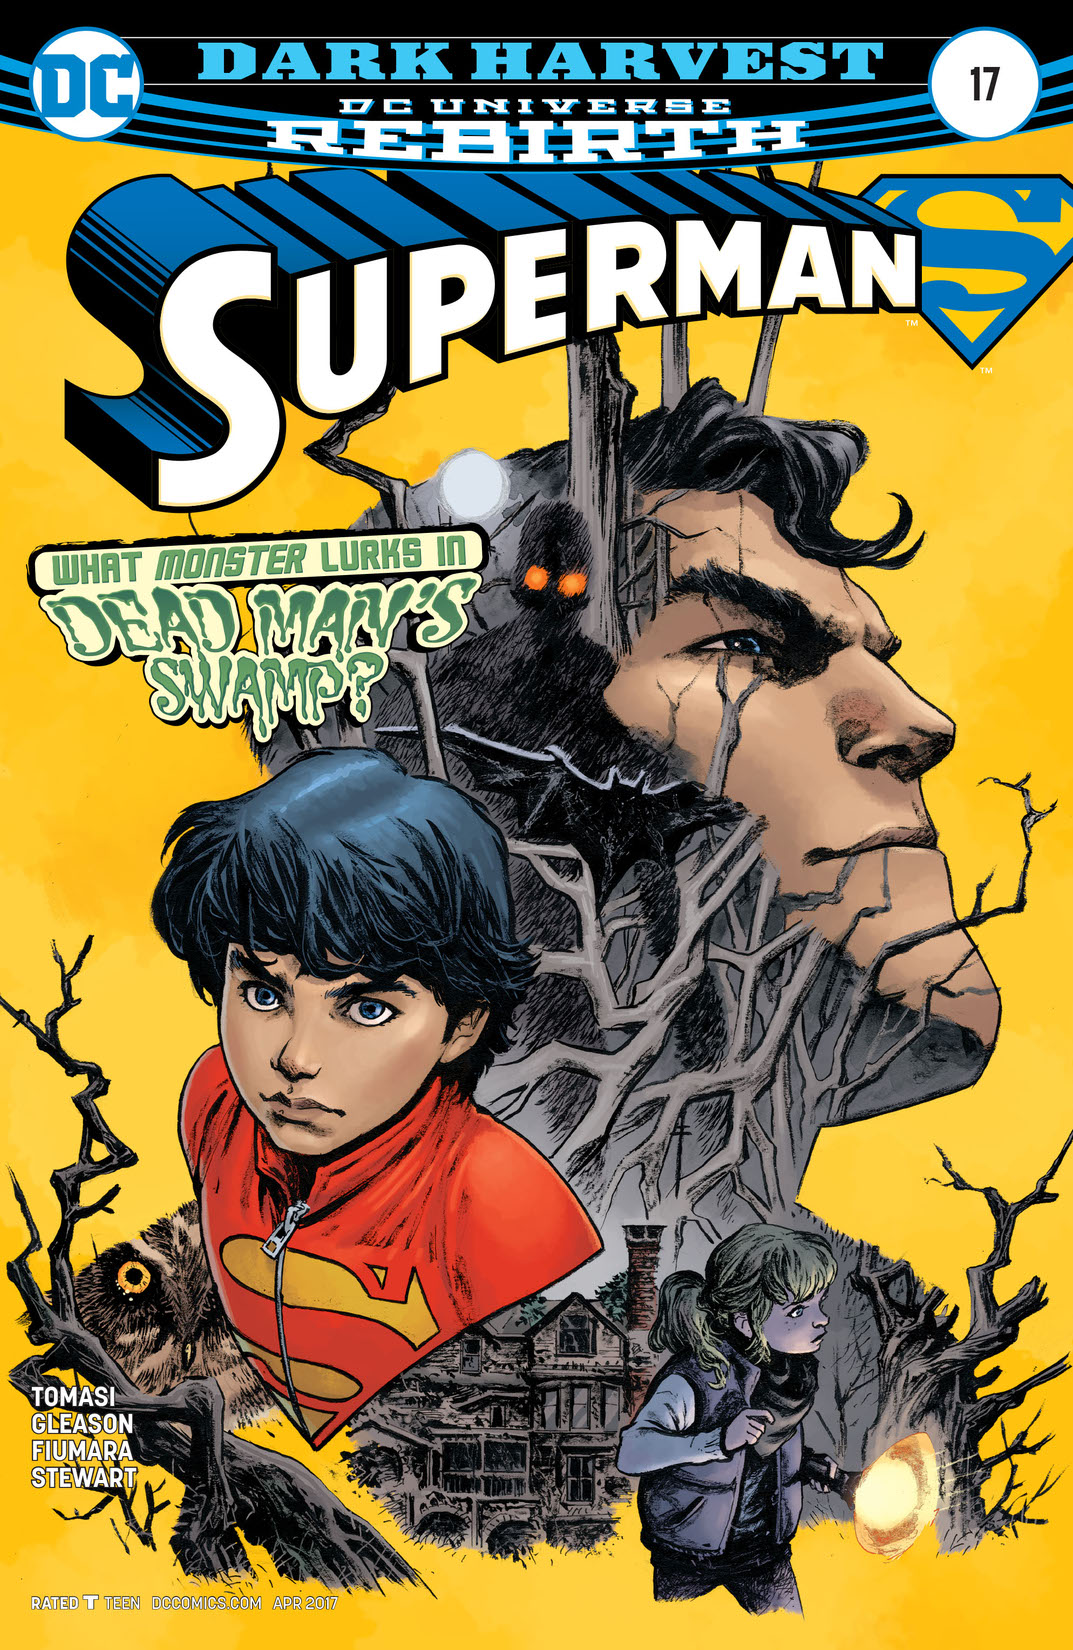 Superman (2016-) #17 preview images